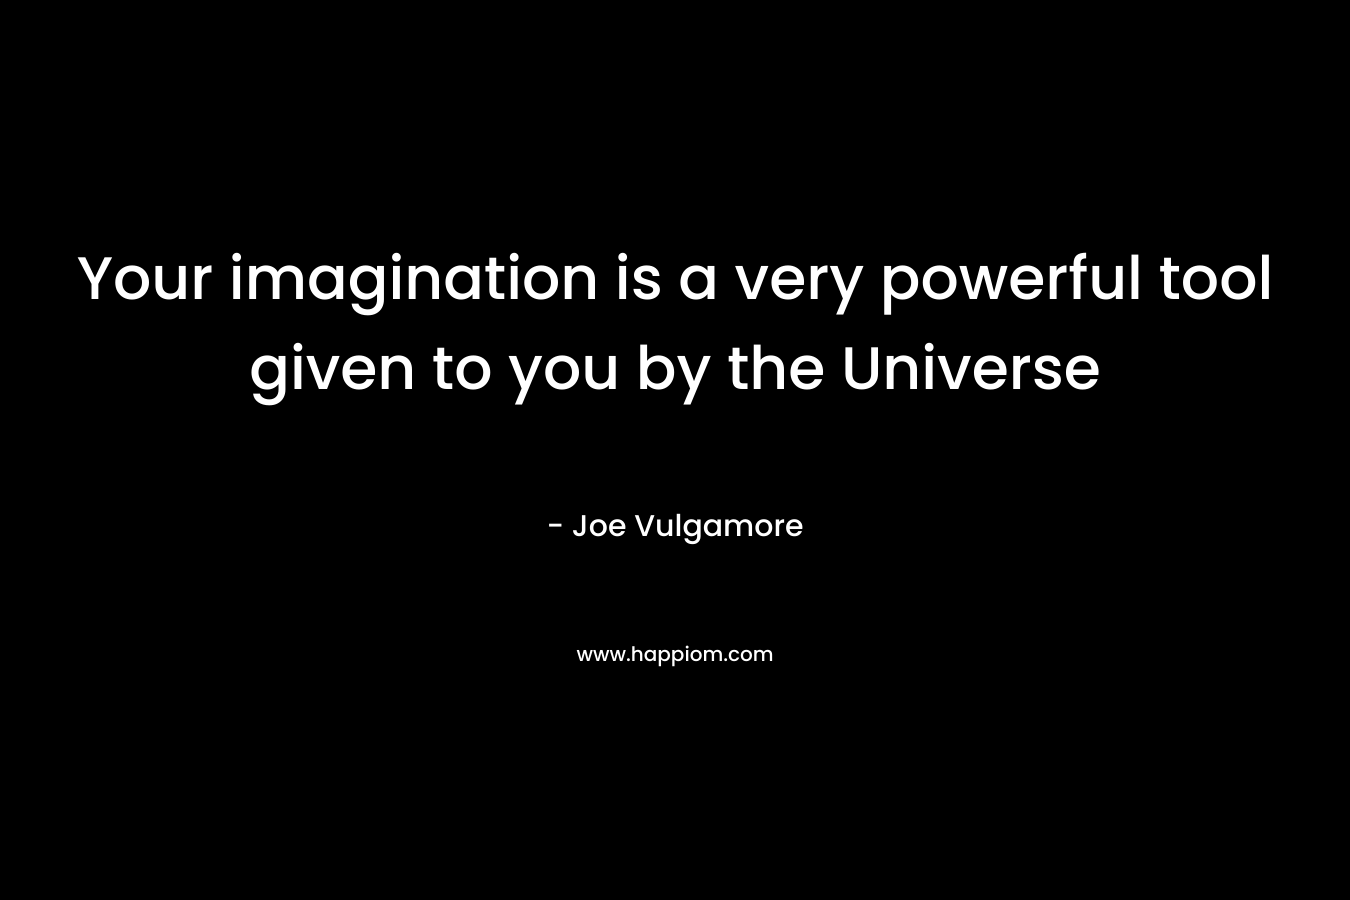 Your imagination is a very powerful tool given to you by the Universe – Joe Vulgamore